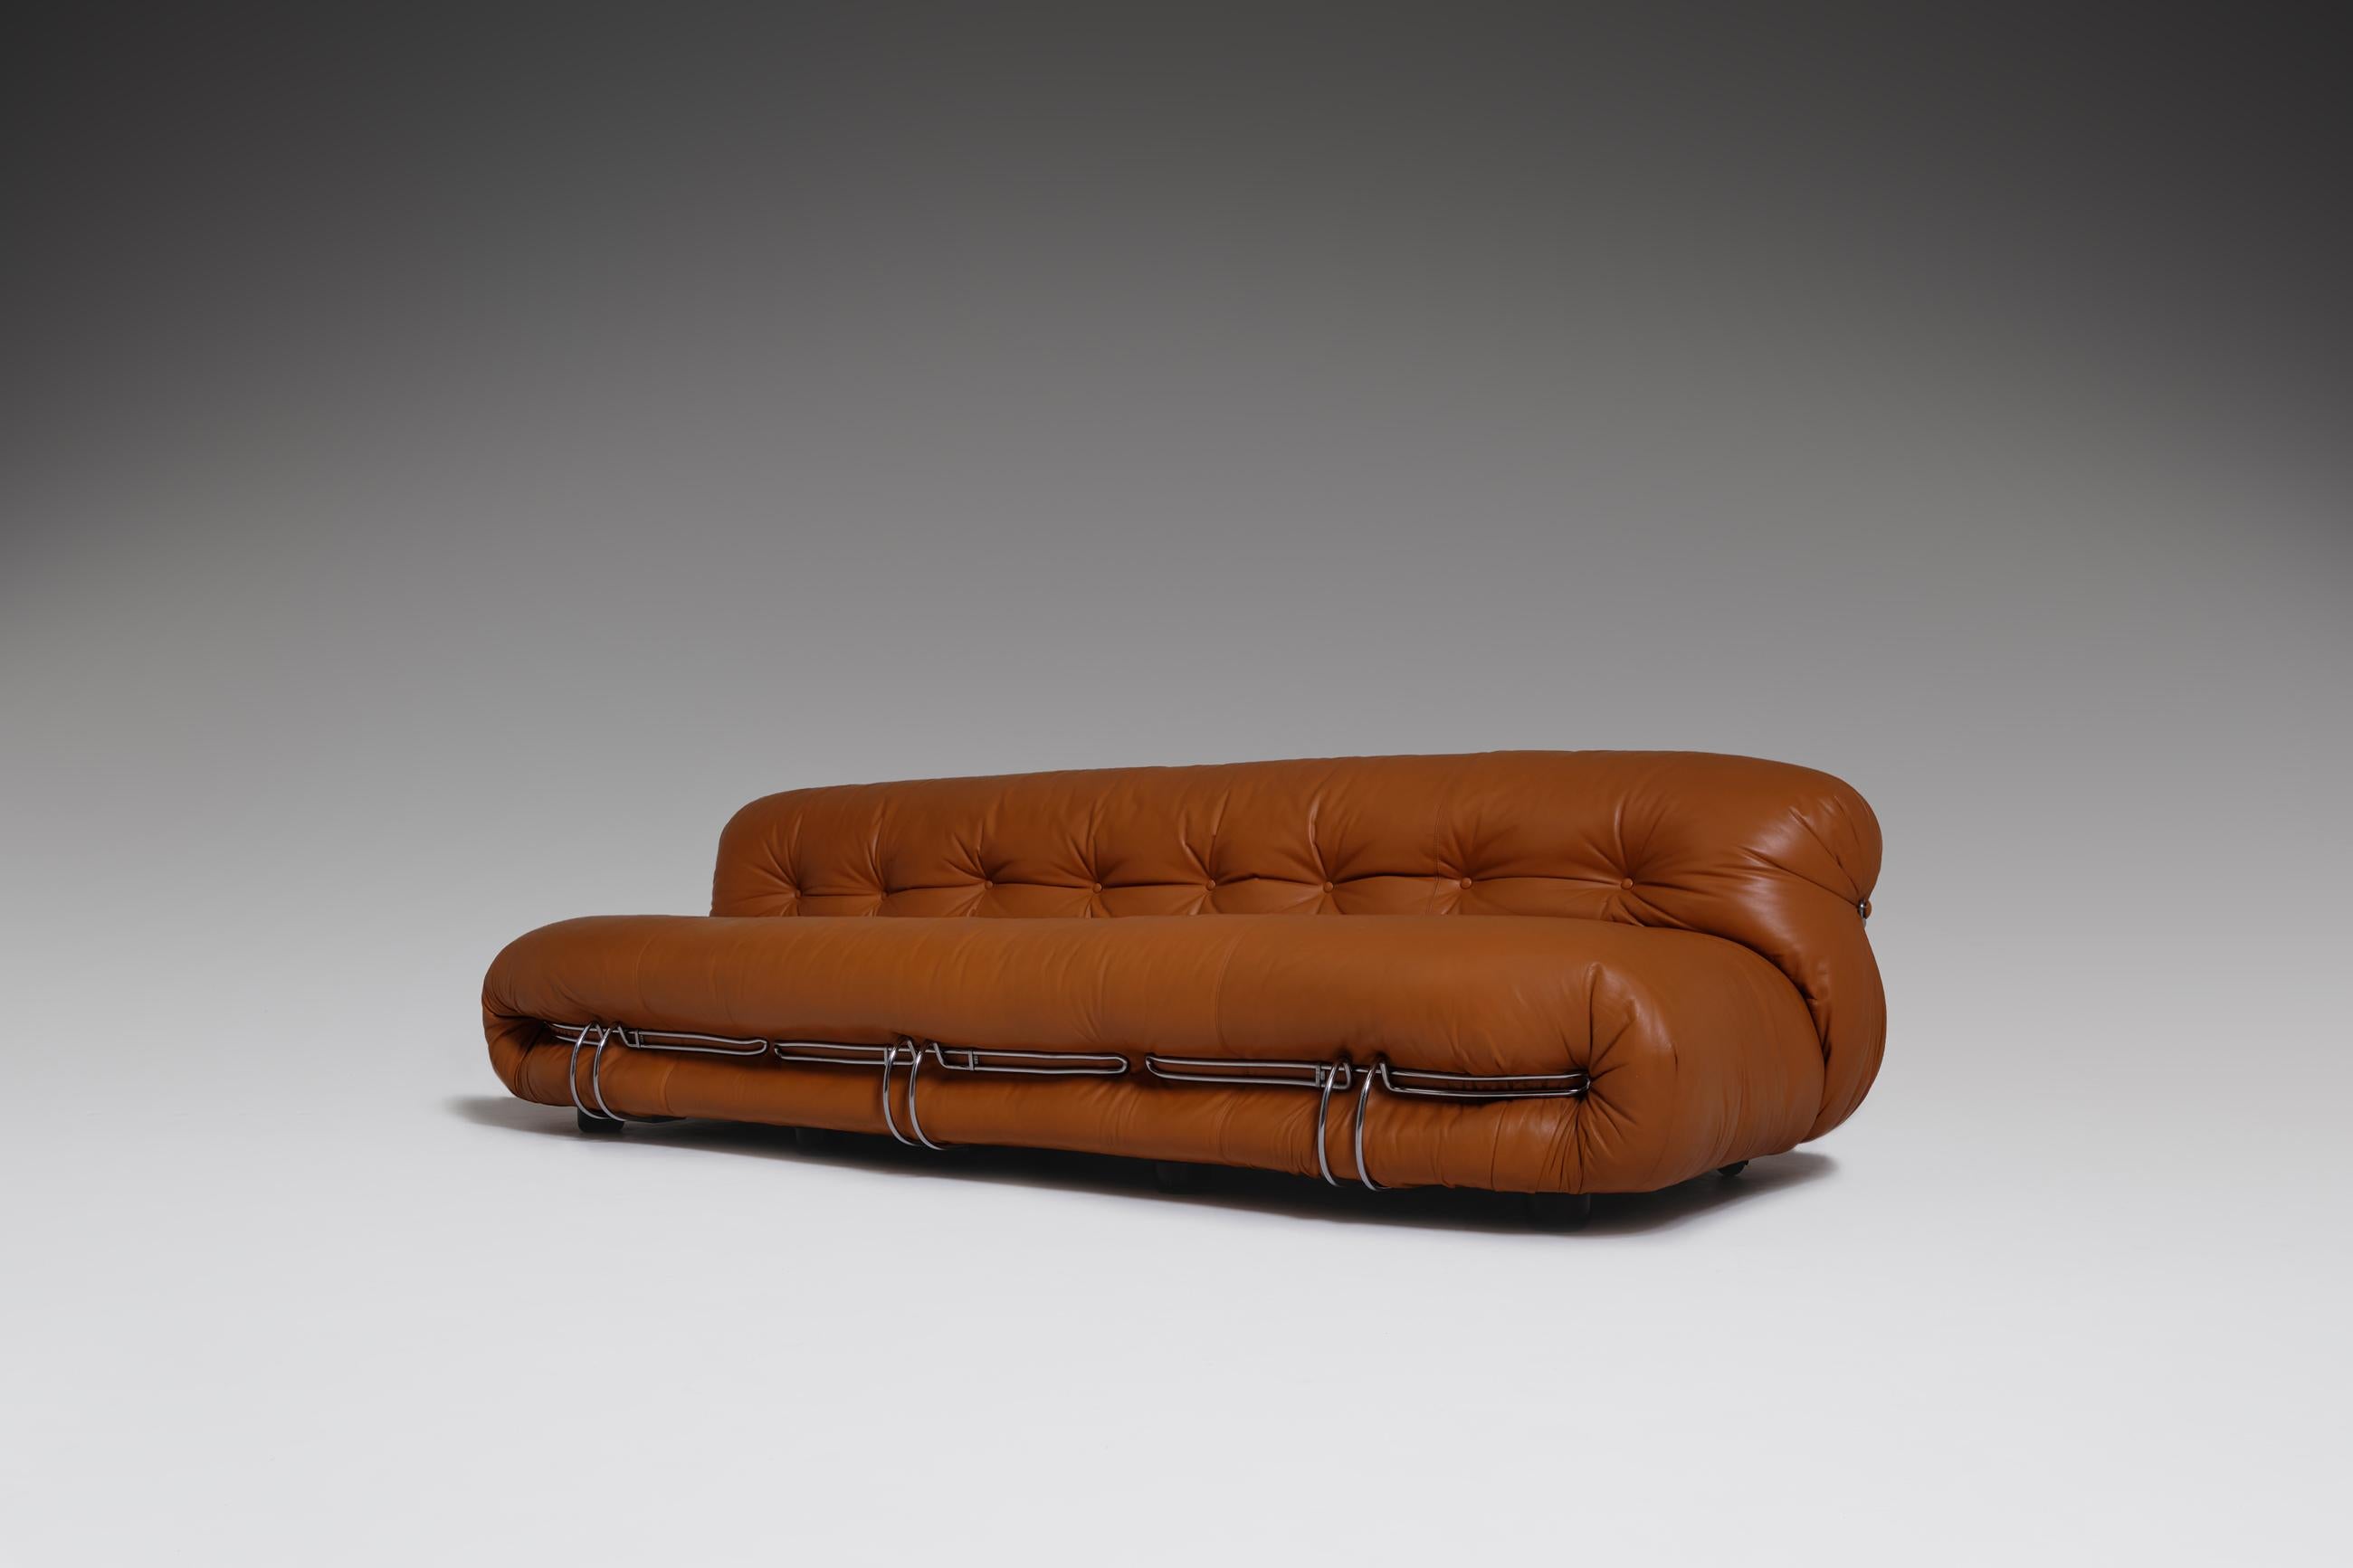 Mid-Century Modern Soriana Three-Seat Sofa in Cognac Leather by Afra & Tobia Scarpa, Italy, 1969